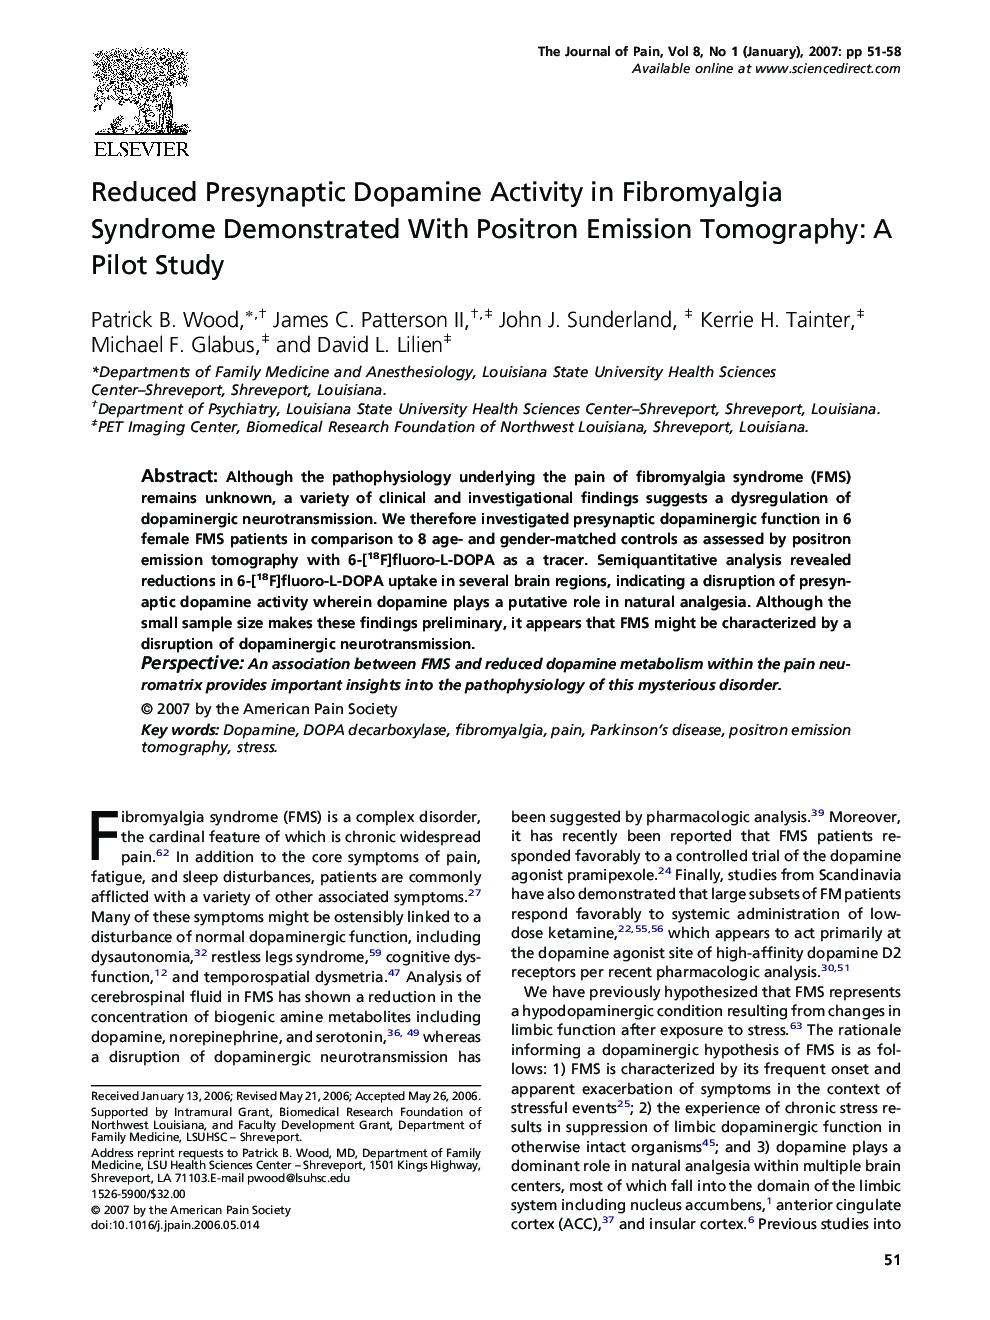 Reduced Presynaptic Dopamine Activity in Fibromyalgia Syndrome Demonstrated With Positron Emission Tomography: A Pilot Study 